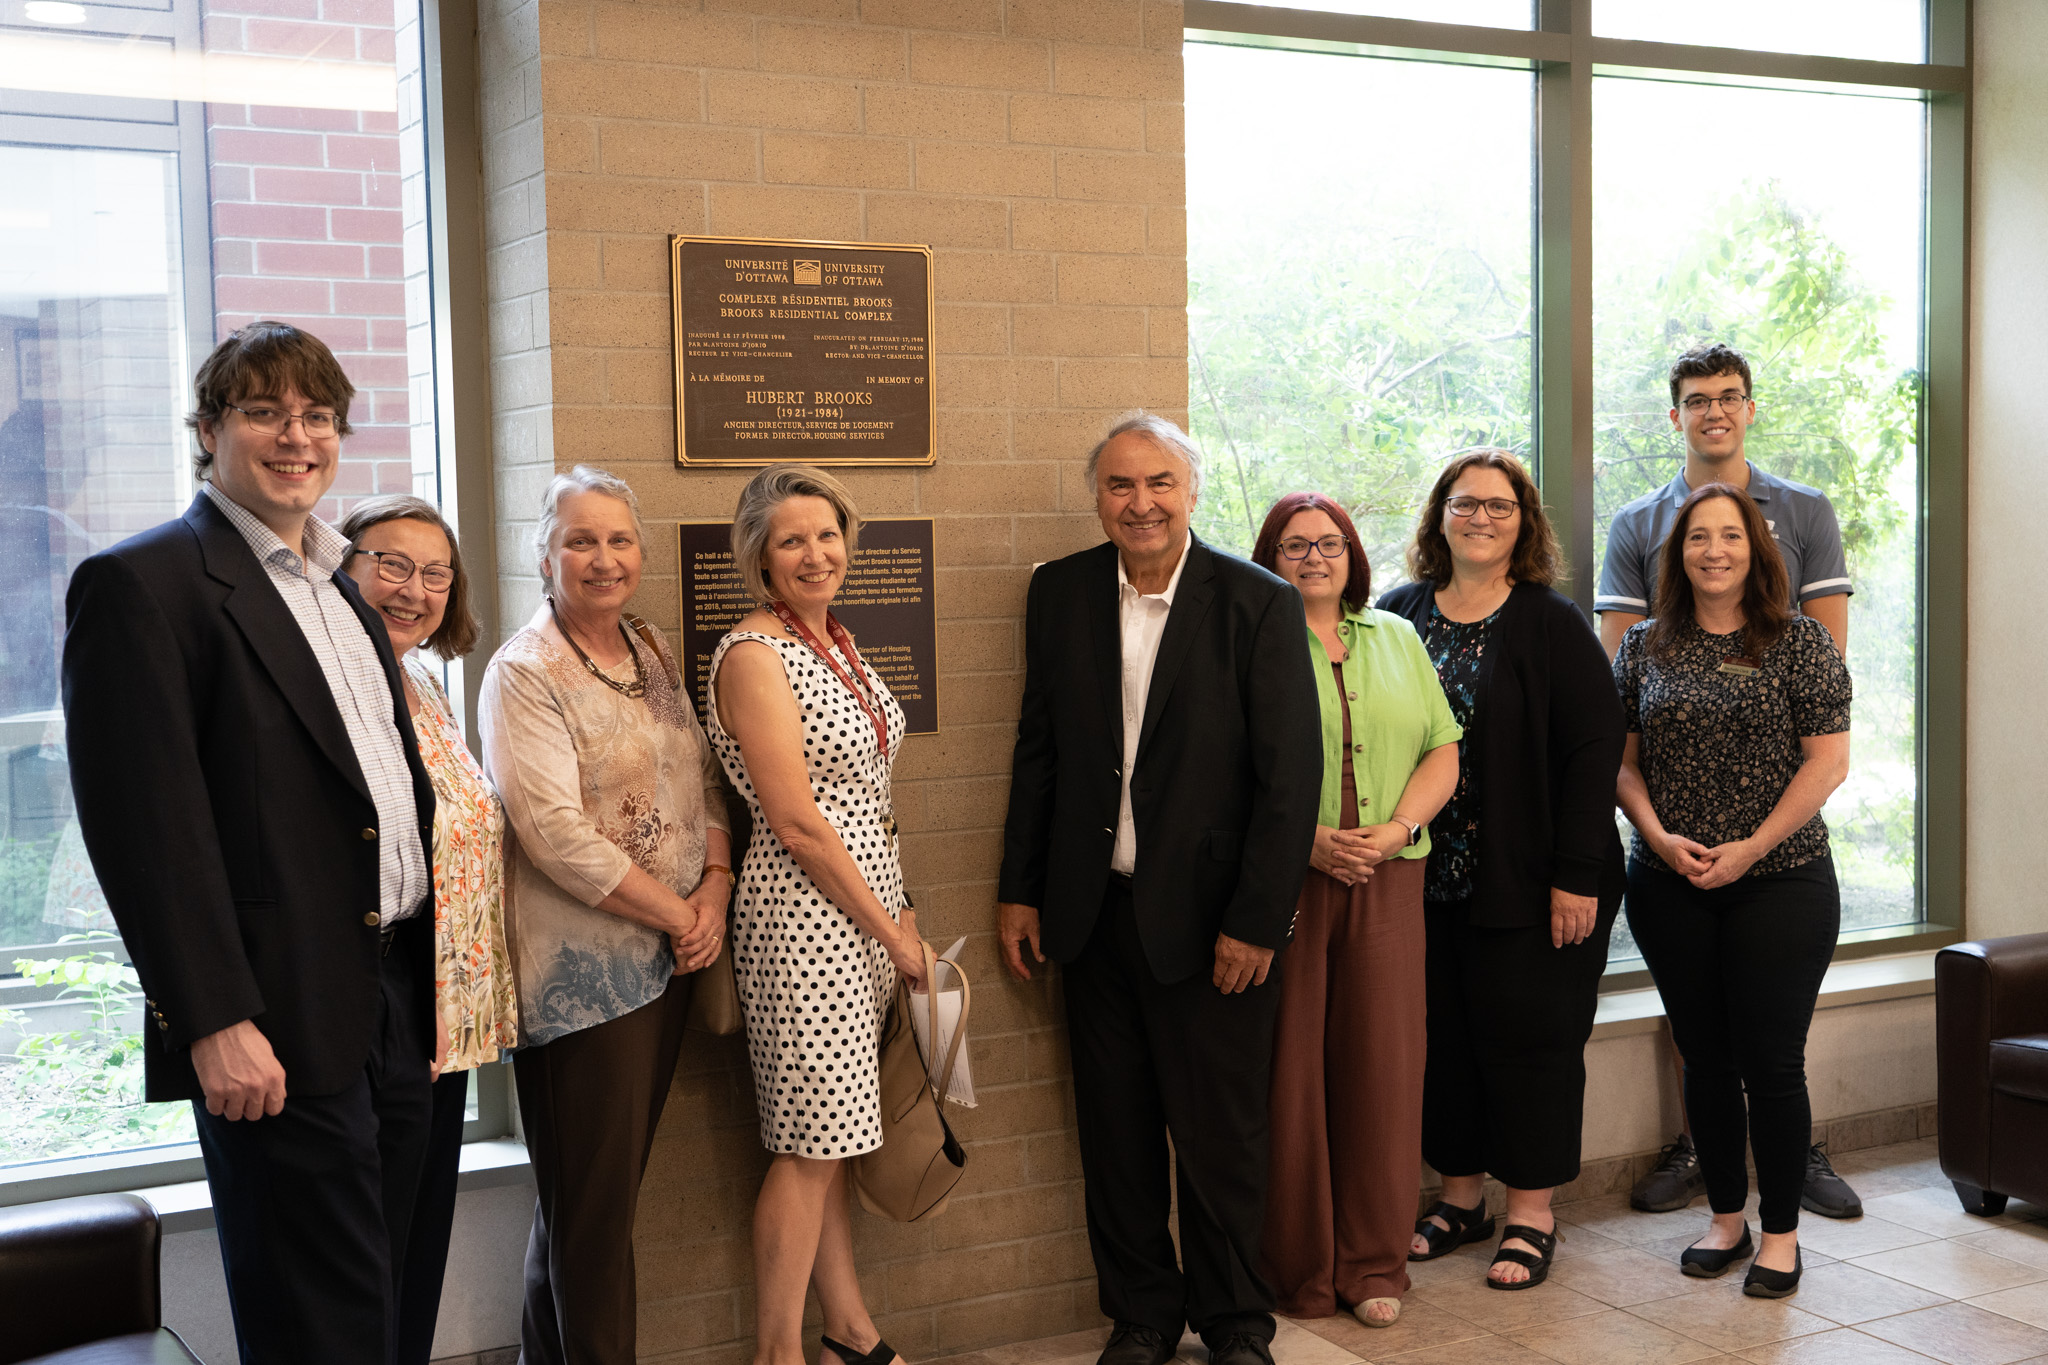 Photo: Group Photo in front of Plaque for Hubert Brooks Foyer